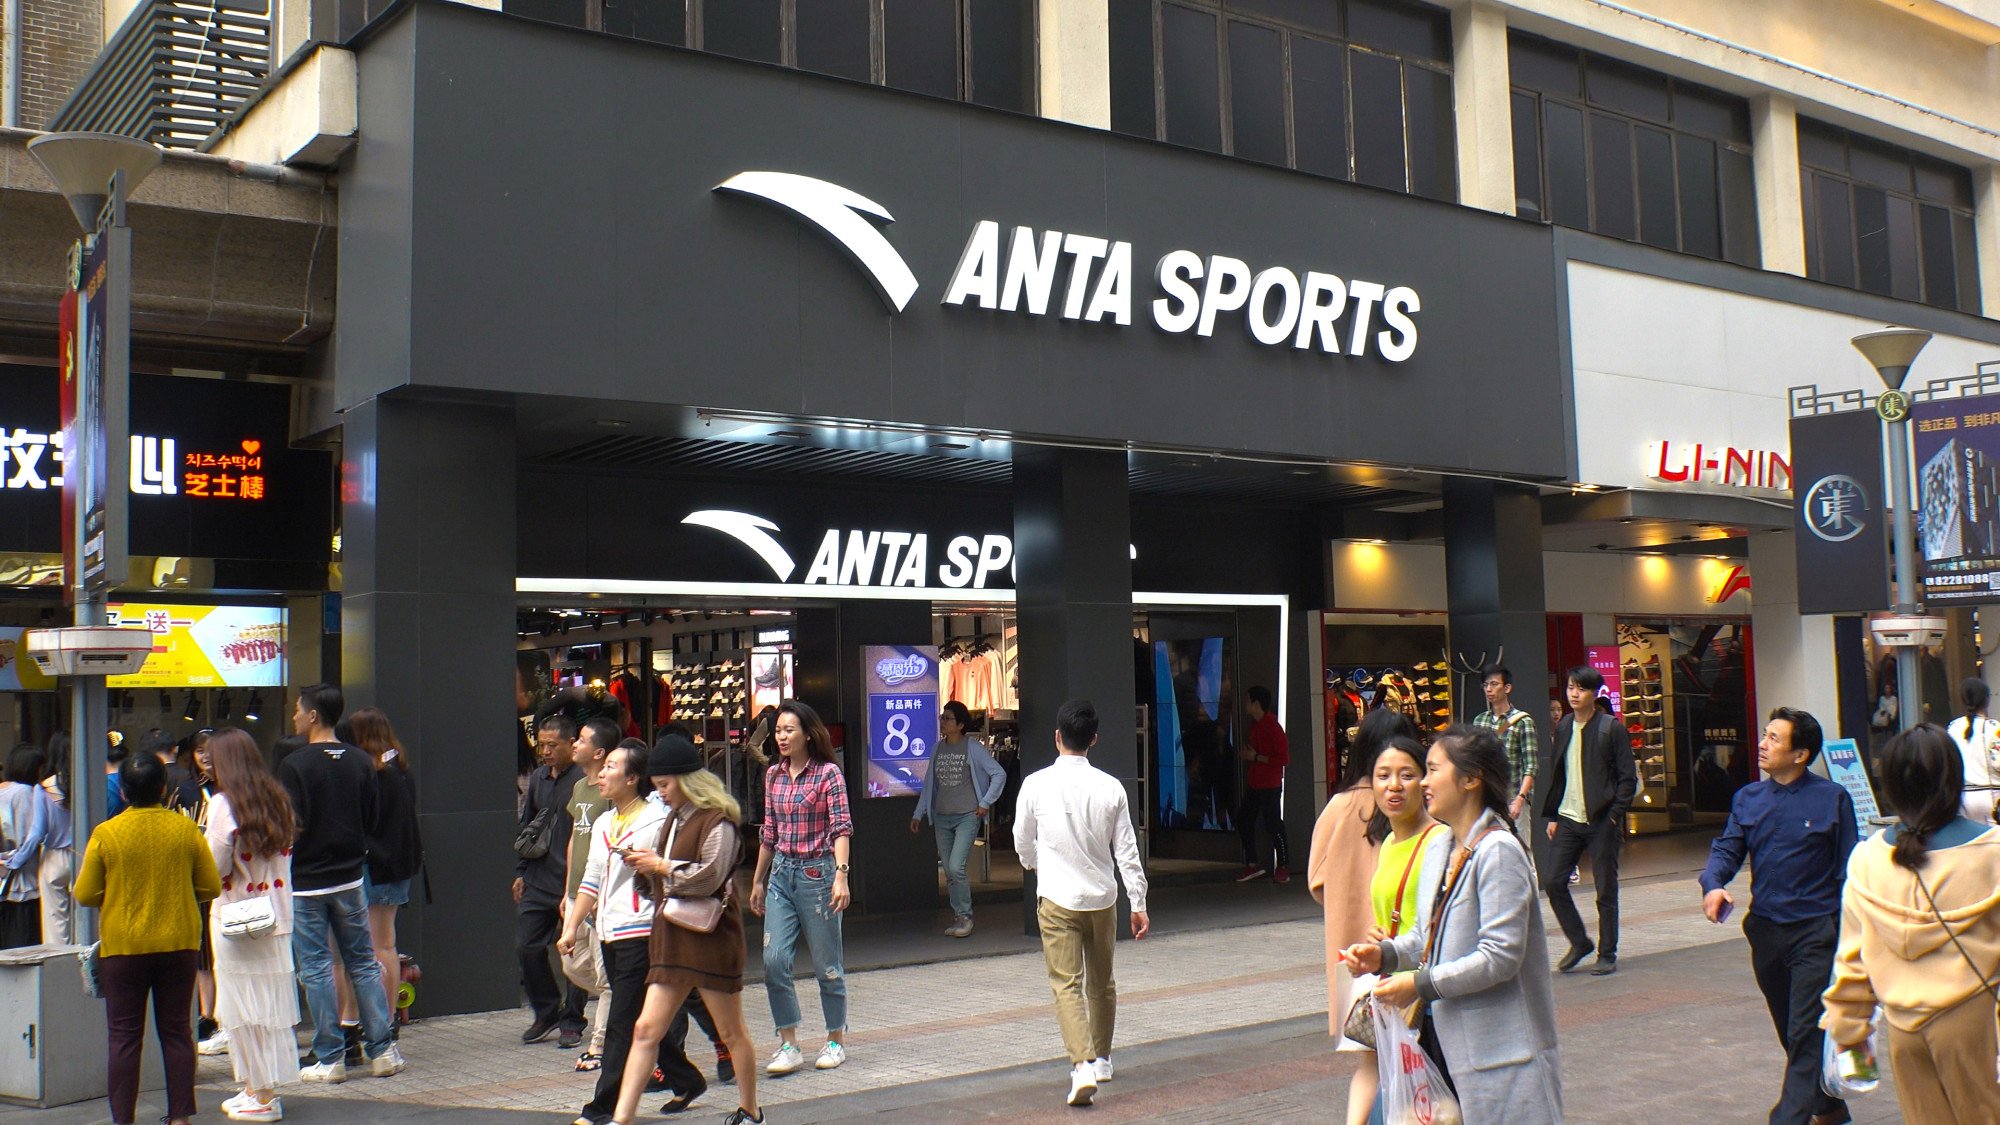 The Anta Sports brand was created in 1991 and focused on sport shoes. It later expanded into sports apparel. Photo: CWH 